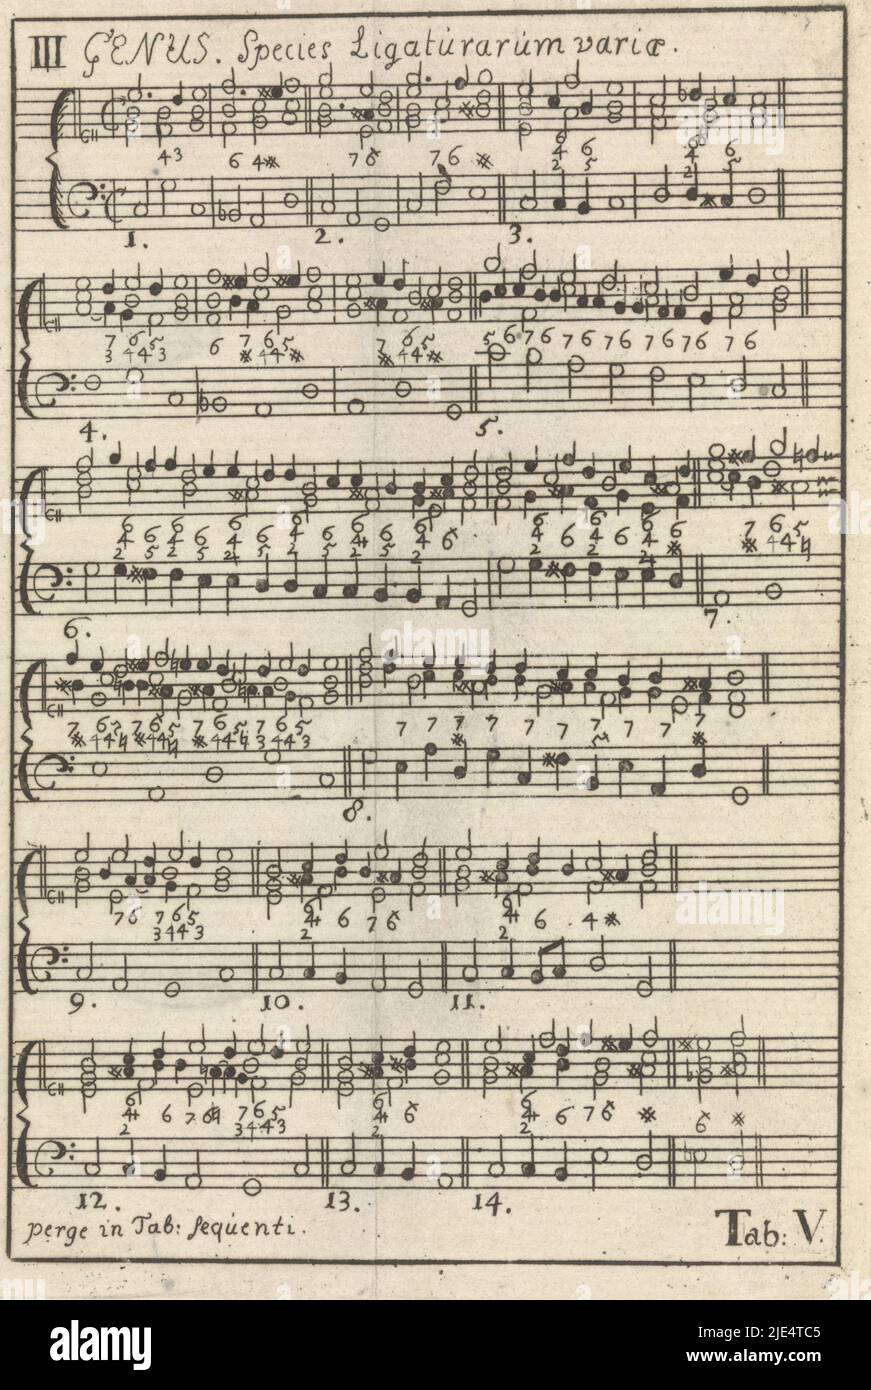 Sheet music off: Konrad Zumbach von Coesfeld, Institutiones musicæ, or Korte onderwyzingen touched the practice of music, and in particular of the general bass [...] in addition to the [...] grounds of the composition, 1743. Bottom right: Tab. V., Sheet music Tab. V, print maker: anonymous, publisher: Gerrit Potvliet, print maker: Netherlands, publisher: Leiden, 1743, paper, etching, h 150 mm × w 104 mm Stock Photo